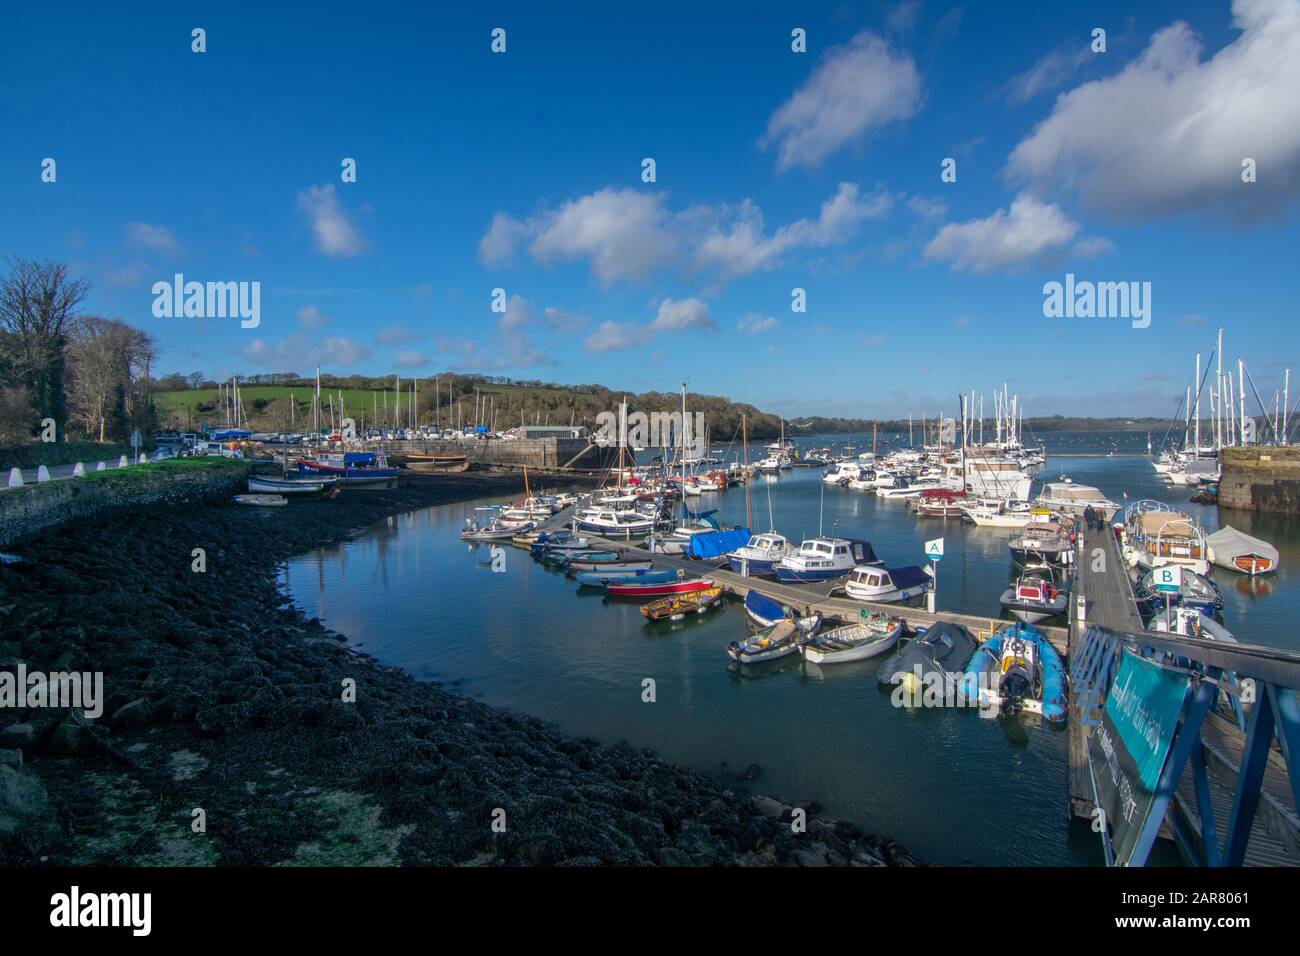 Boats at Mylor Yacht Harbour Stock Photo